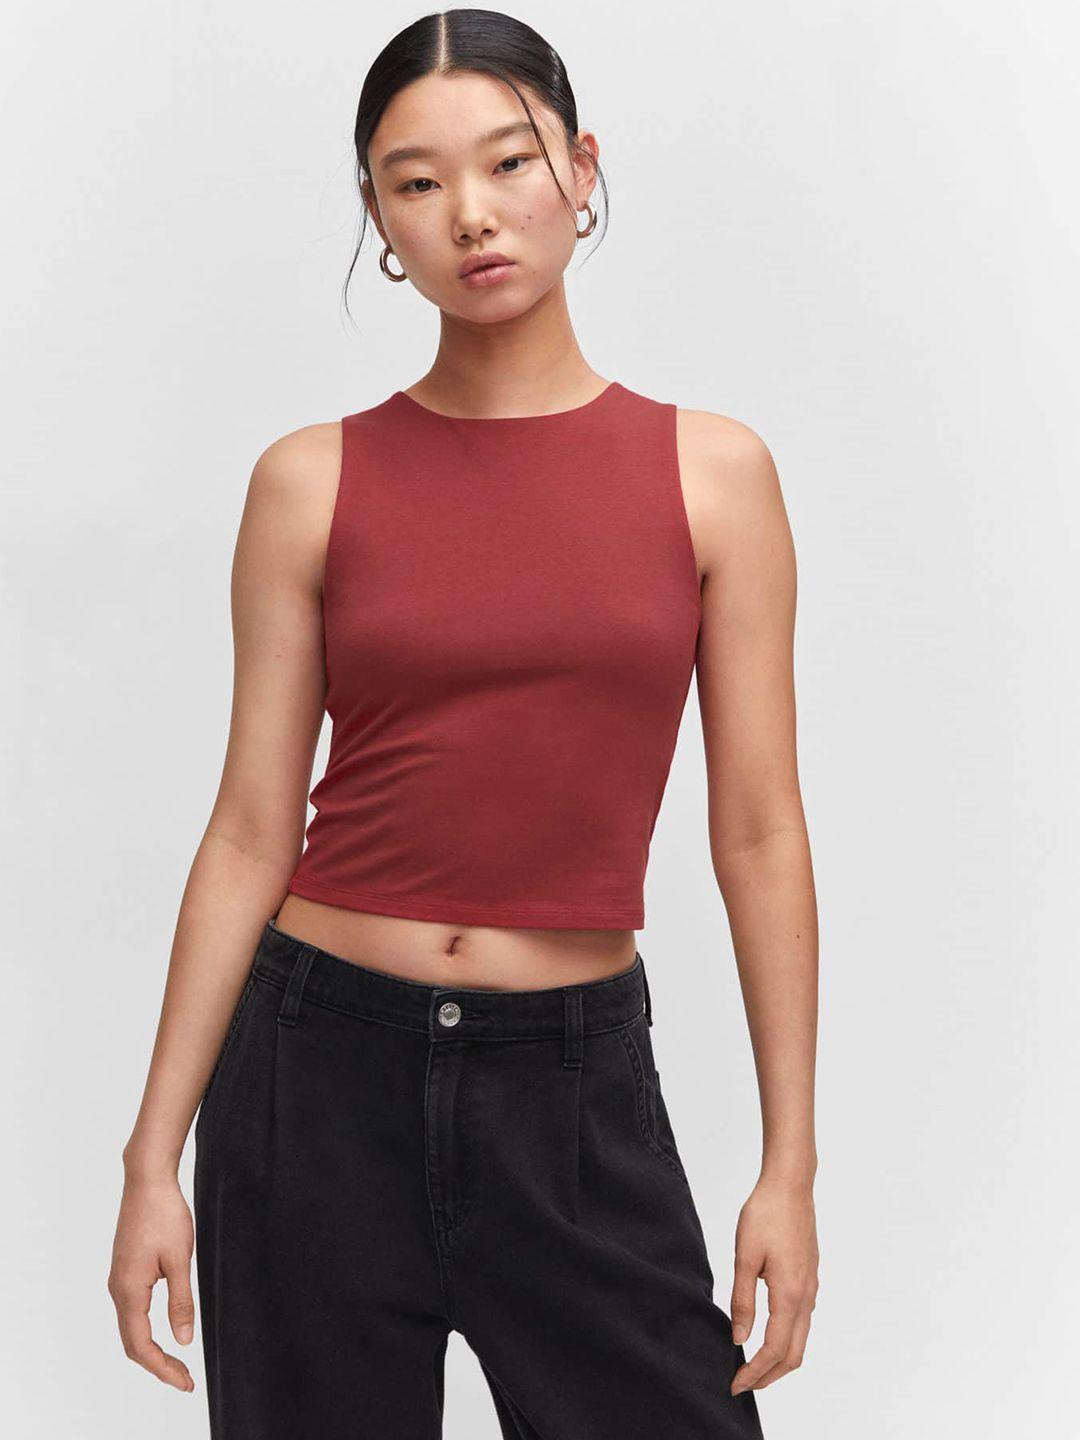 mango fitted crop top